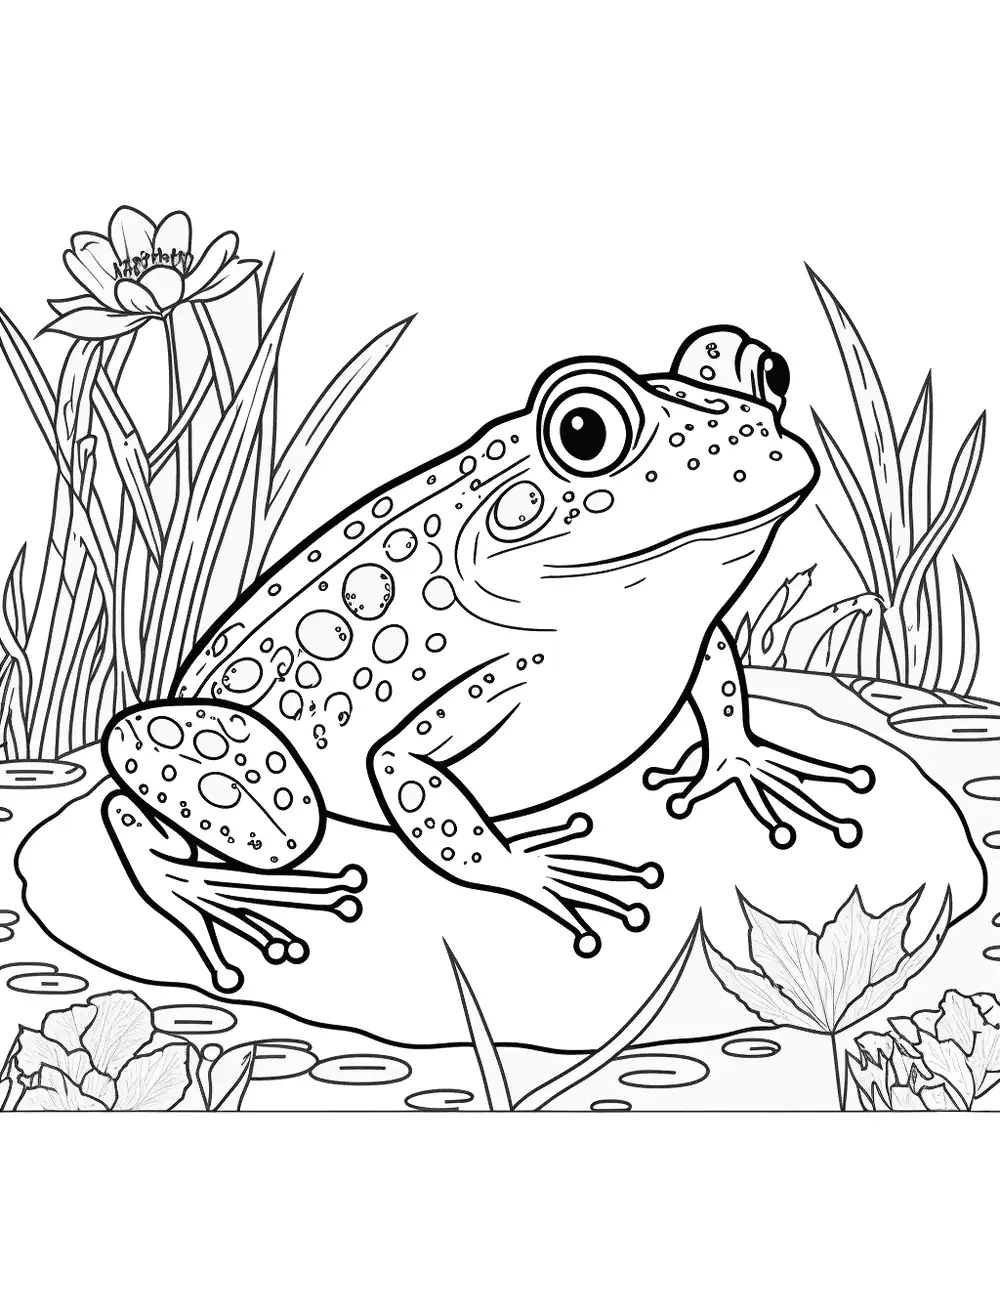 Bull Frog In a Swamp Coloring Page - A bullfrog in a swamp, surrounded by lily pads and other plants.